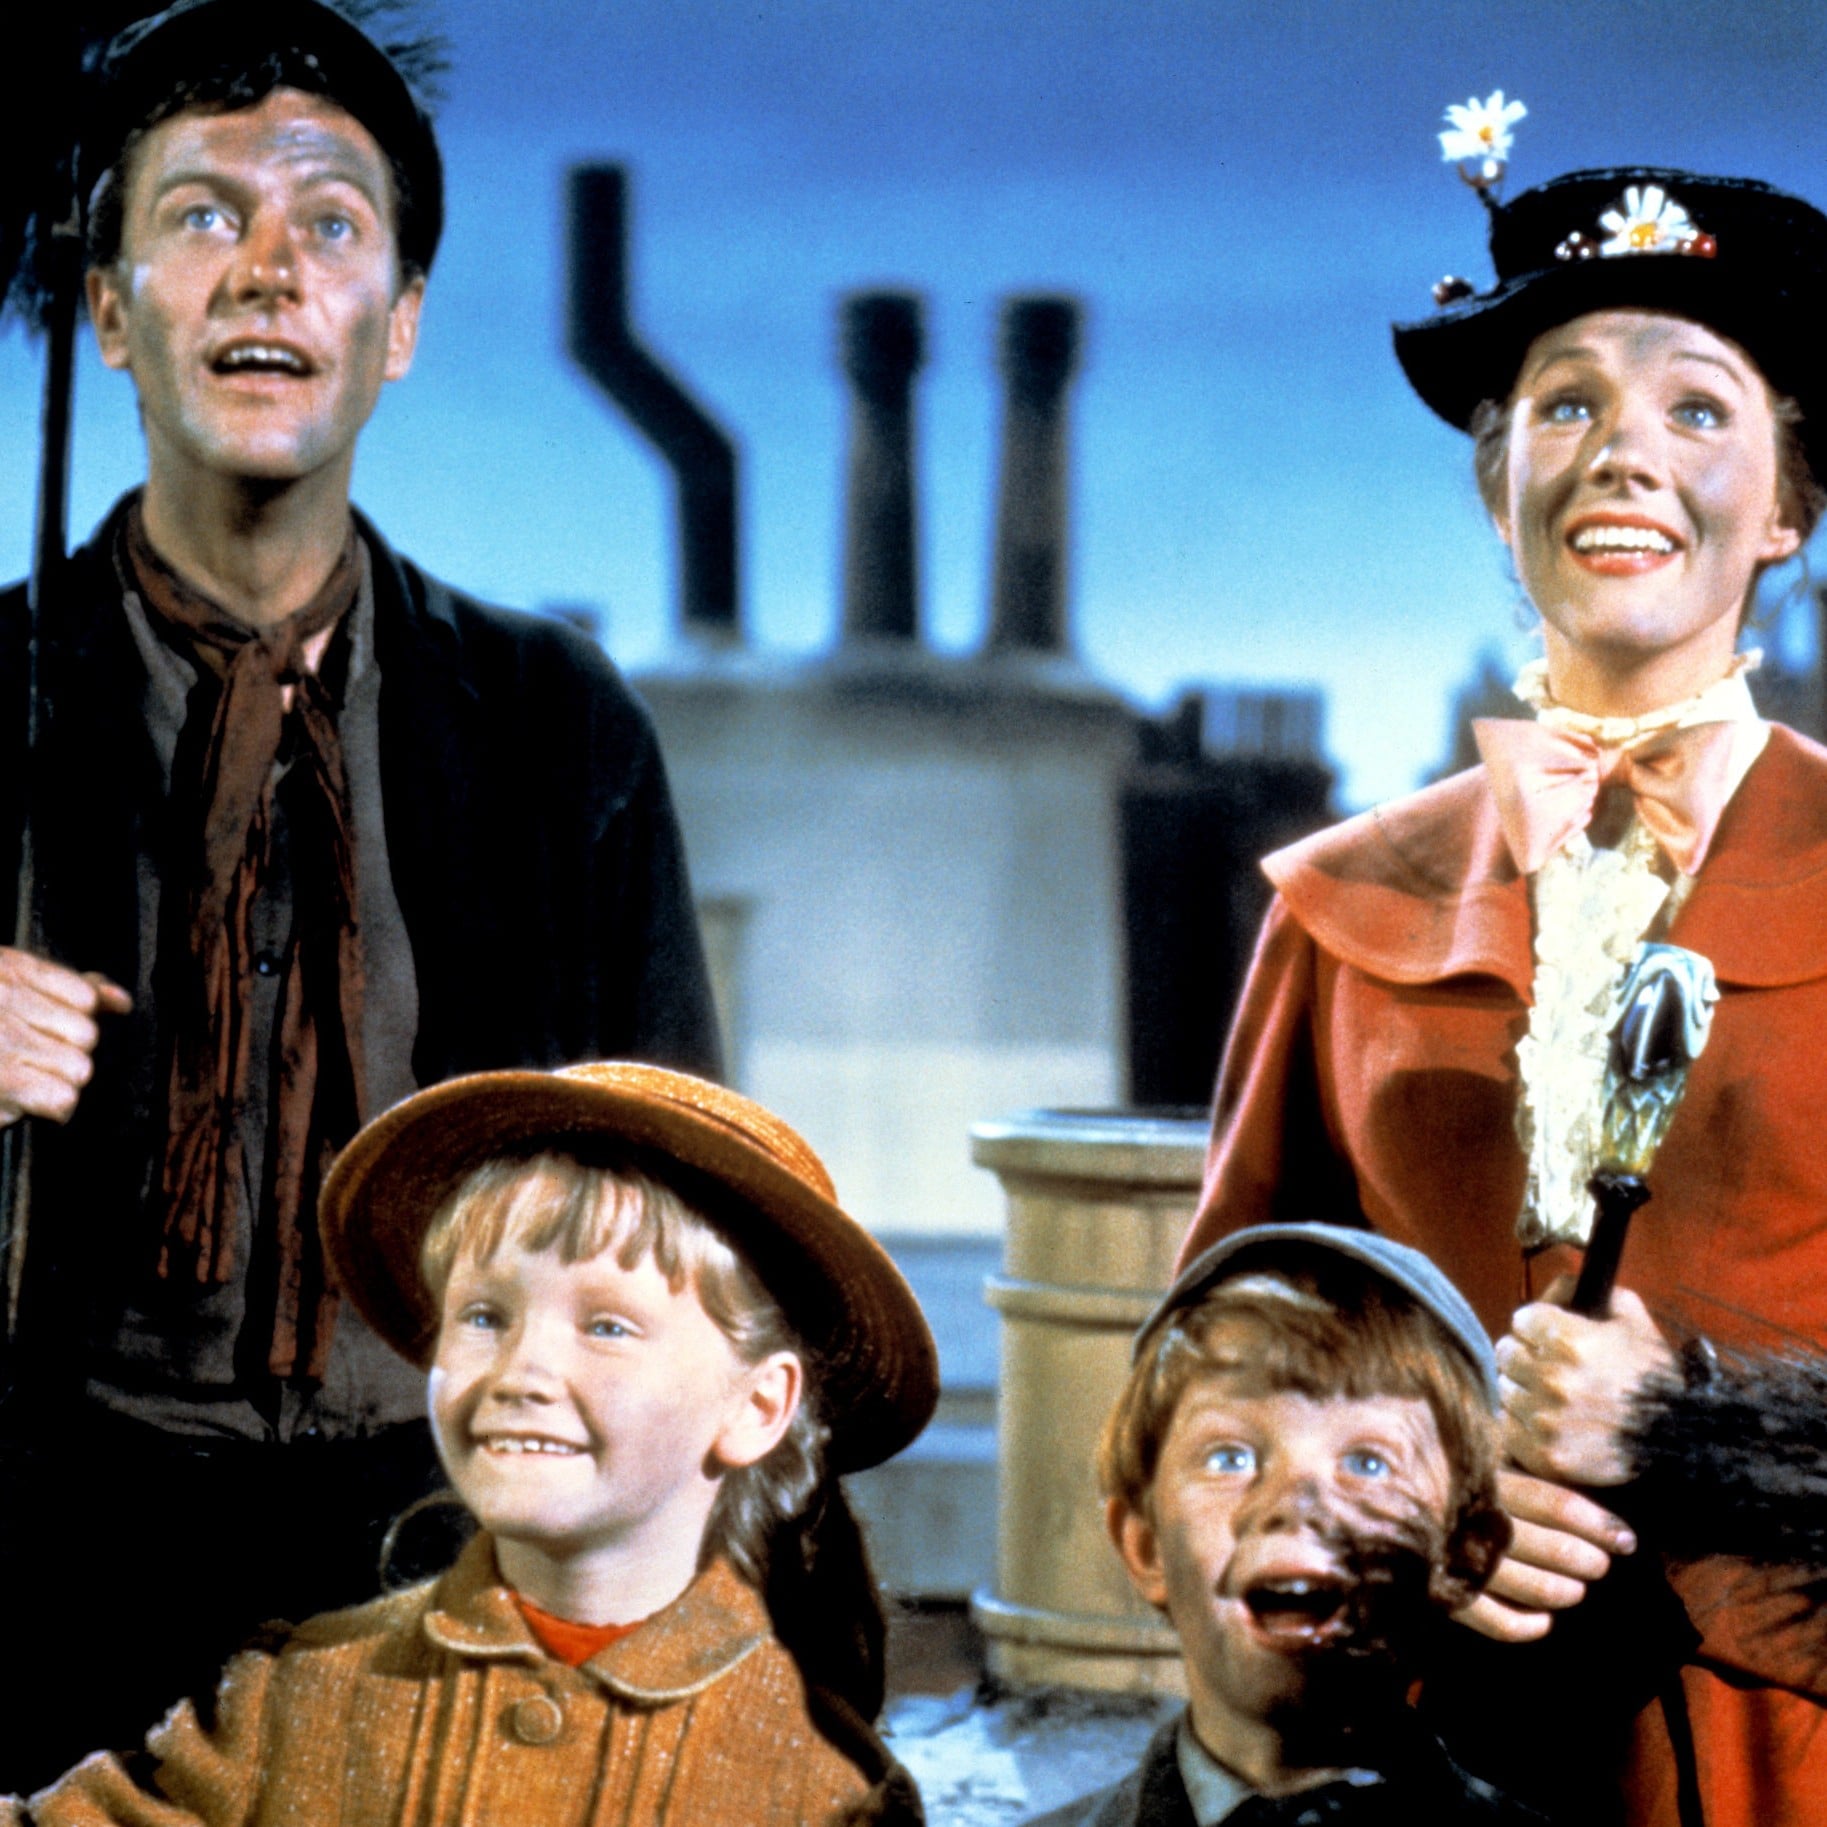 Dick van dyke cast name in mary poppins